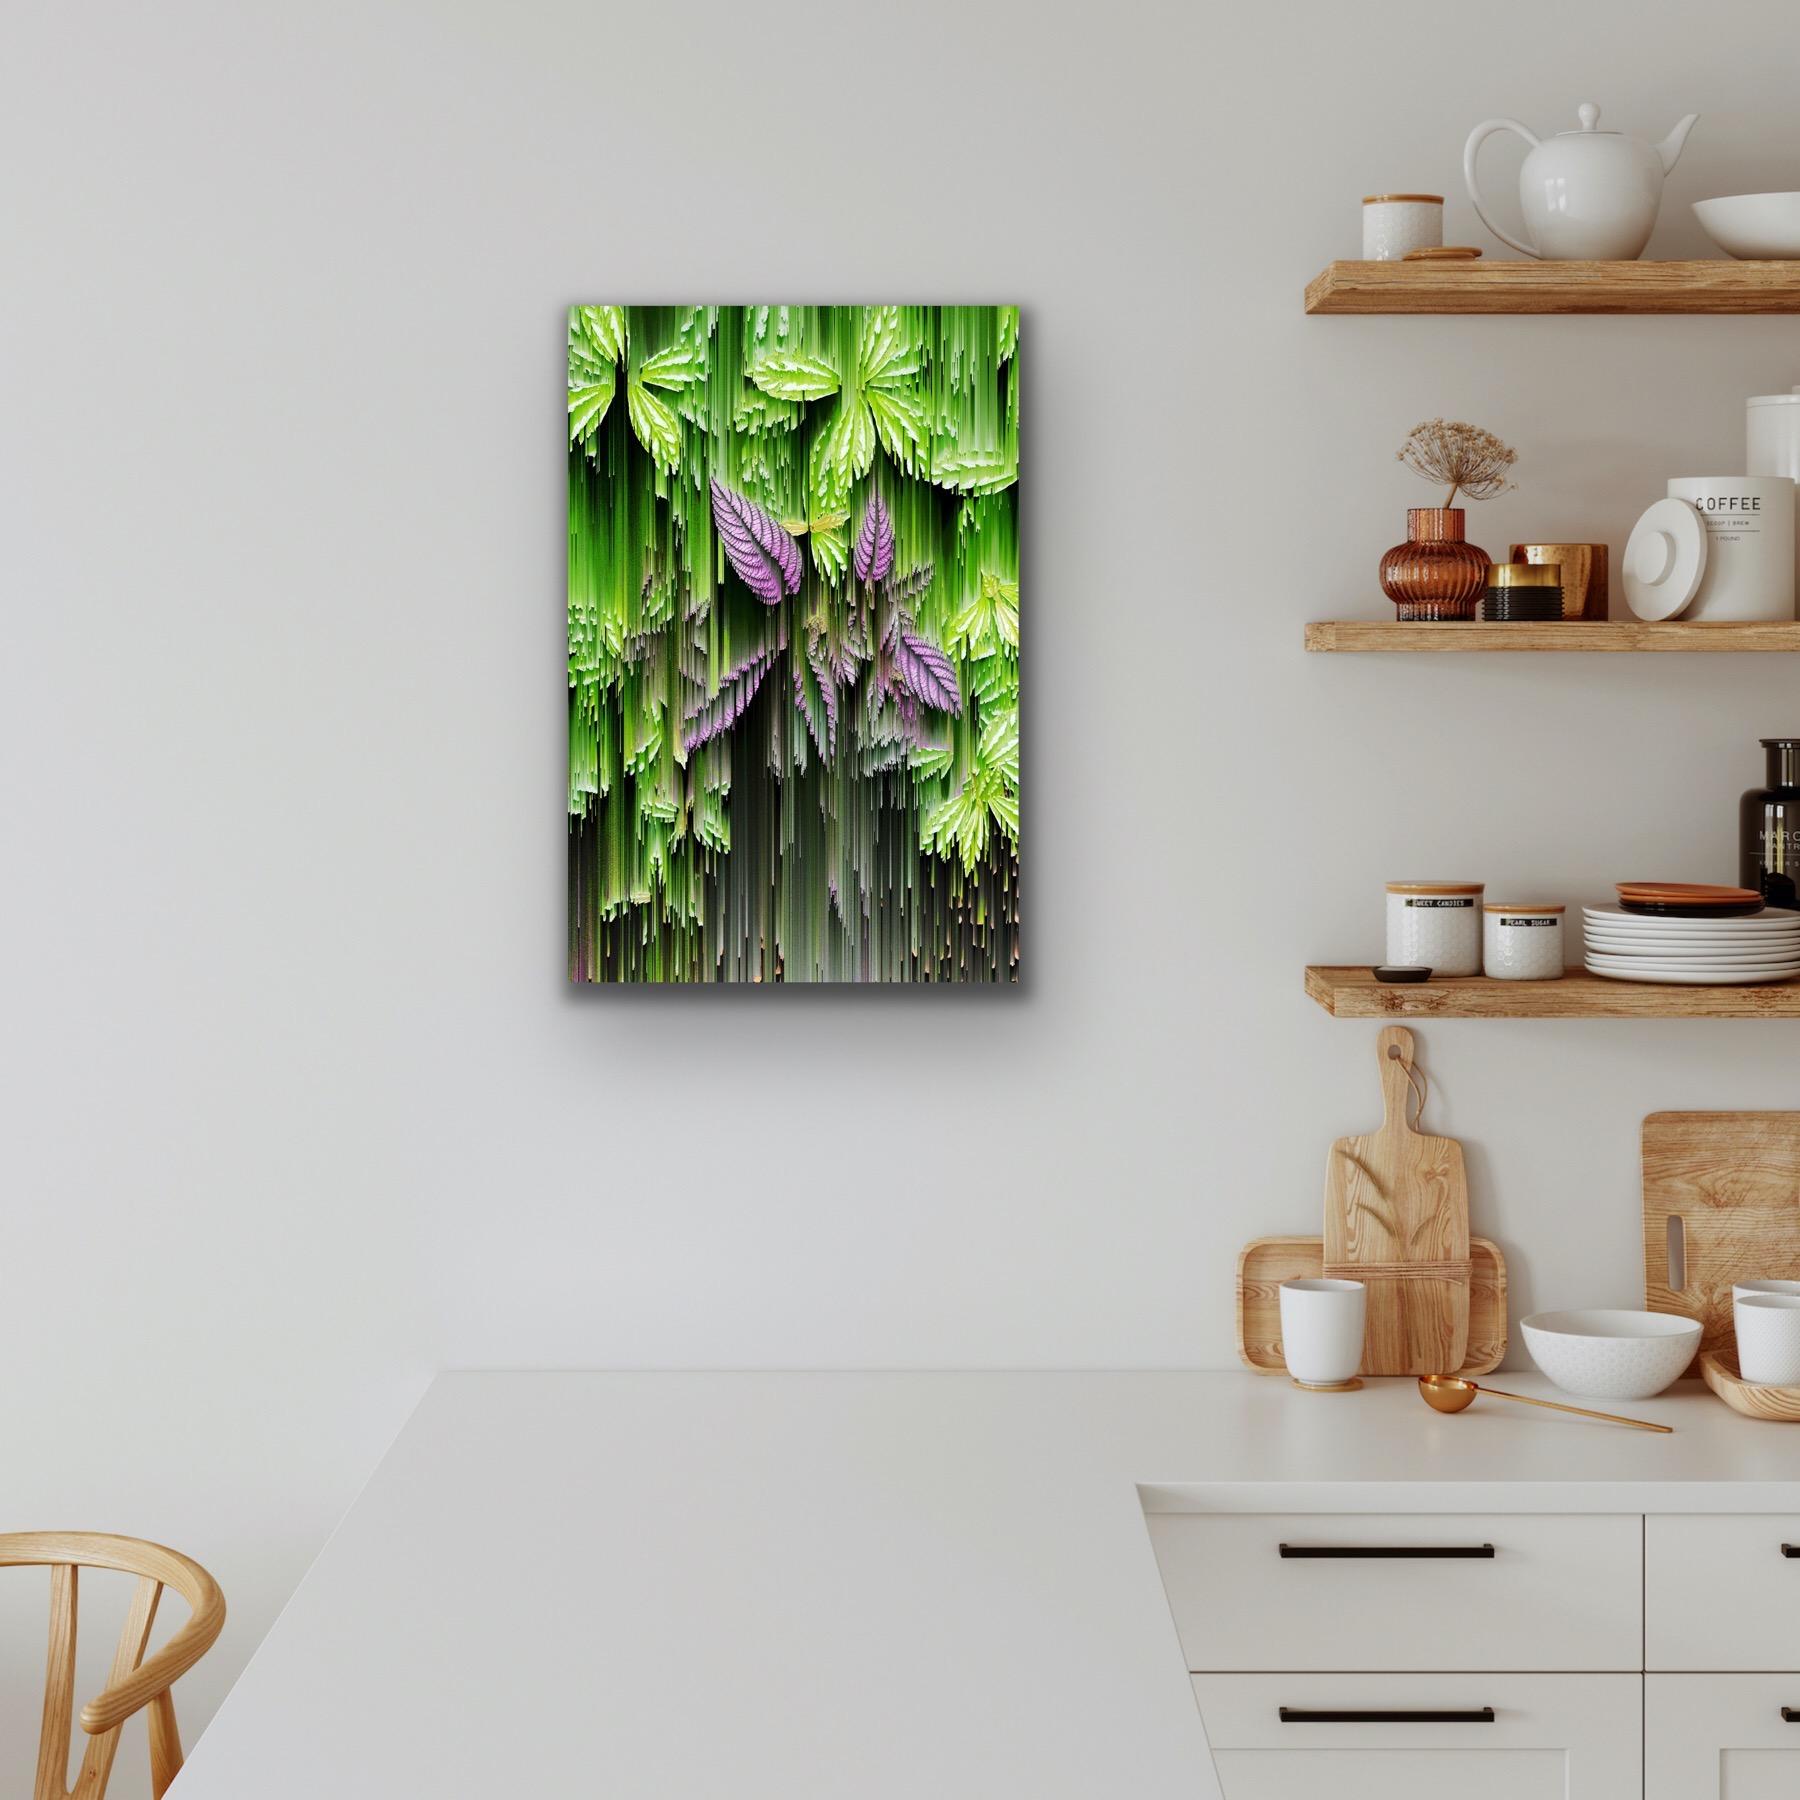 Outnumbered, Abstract Floral Art, Green and Pink Art, Futuristic Digital Art - Photograph by Katie Hallam